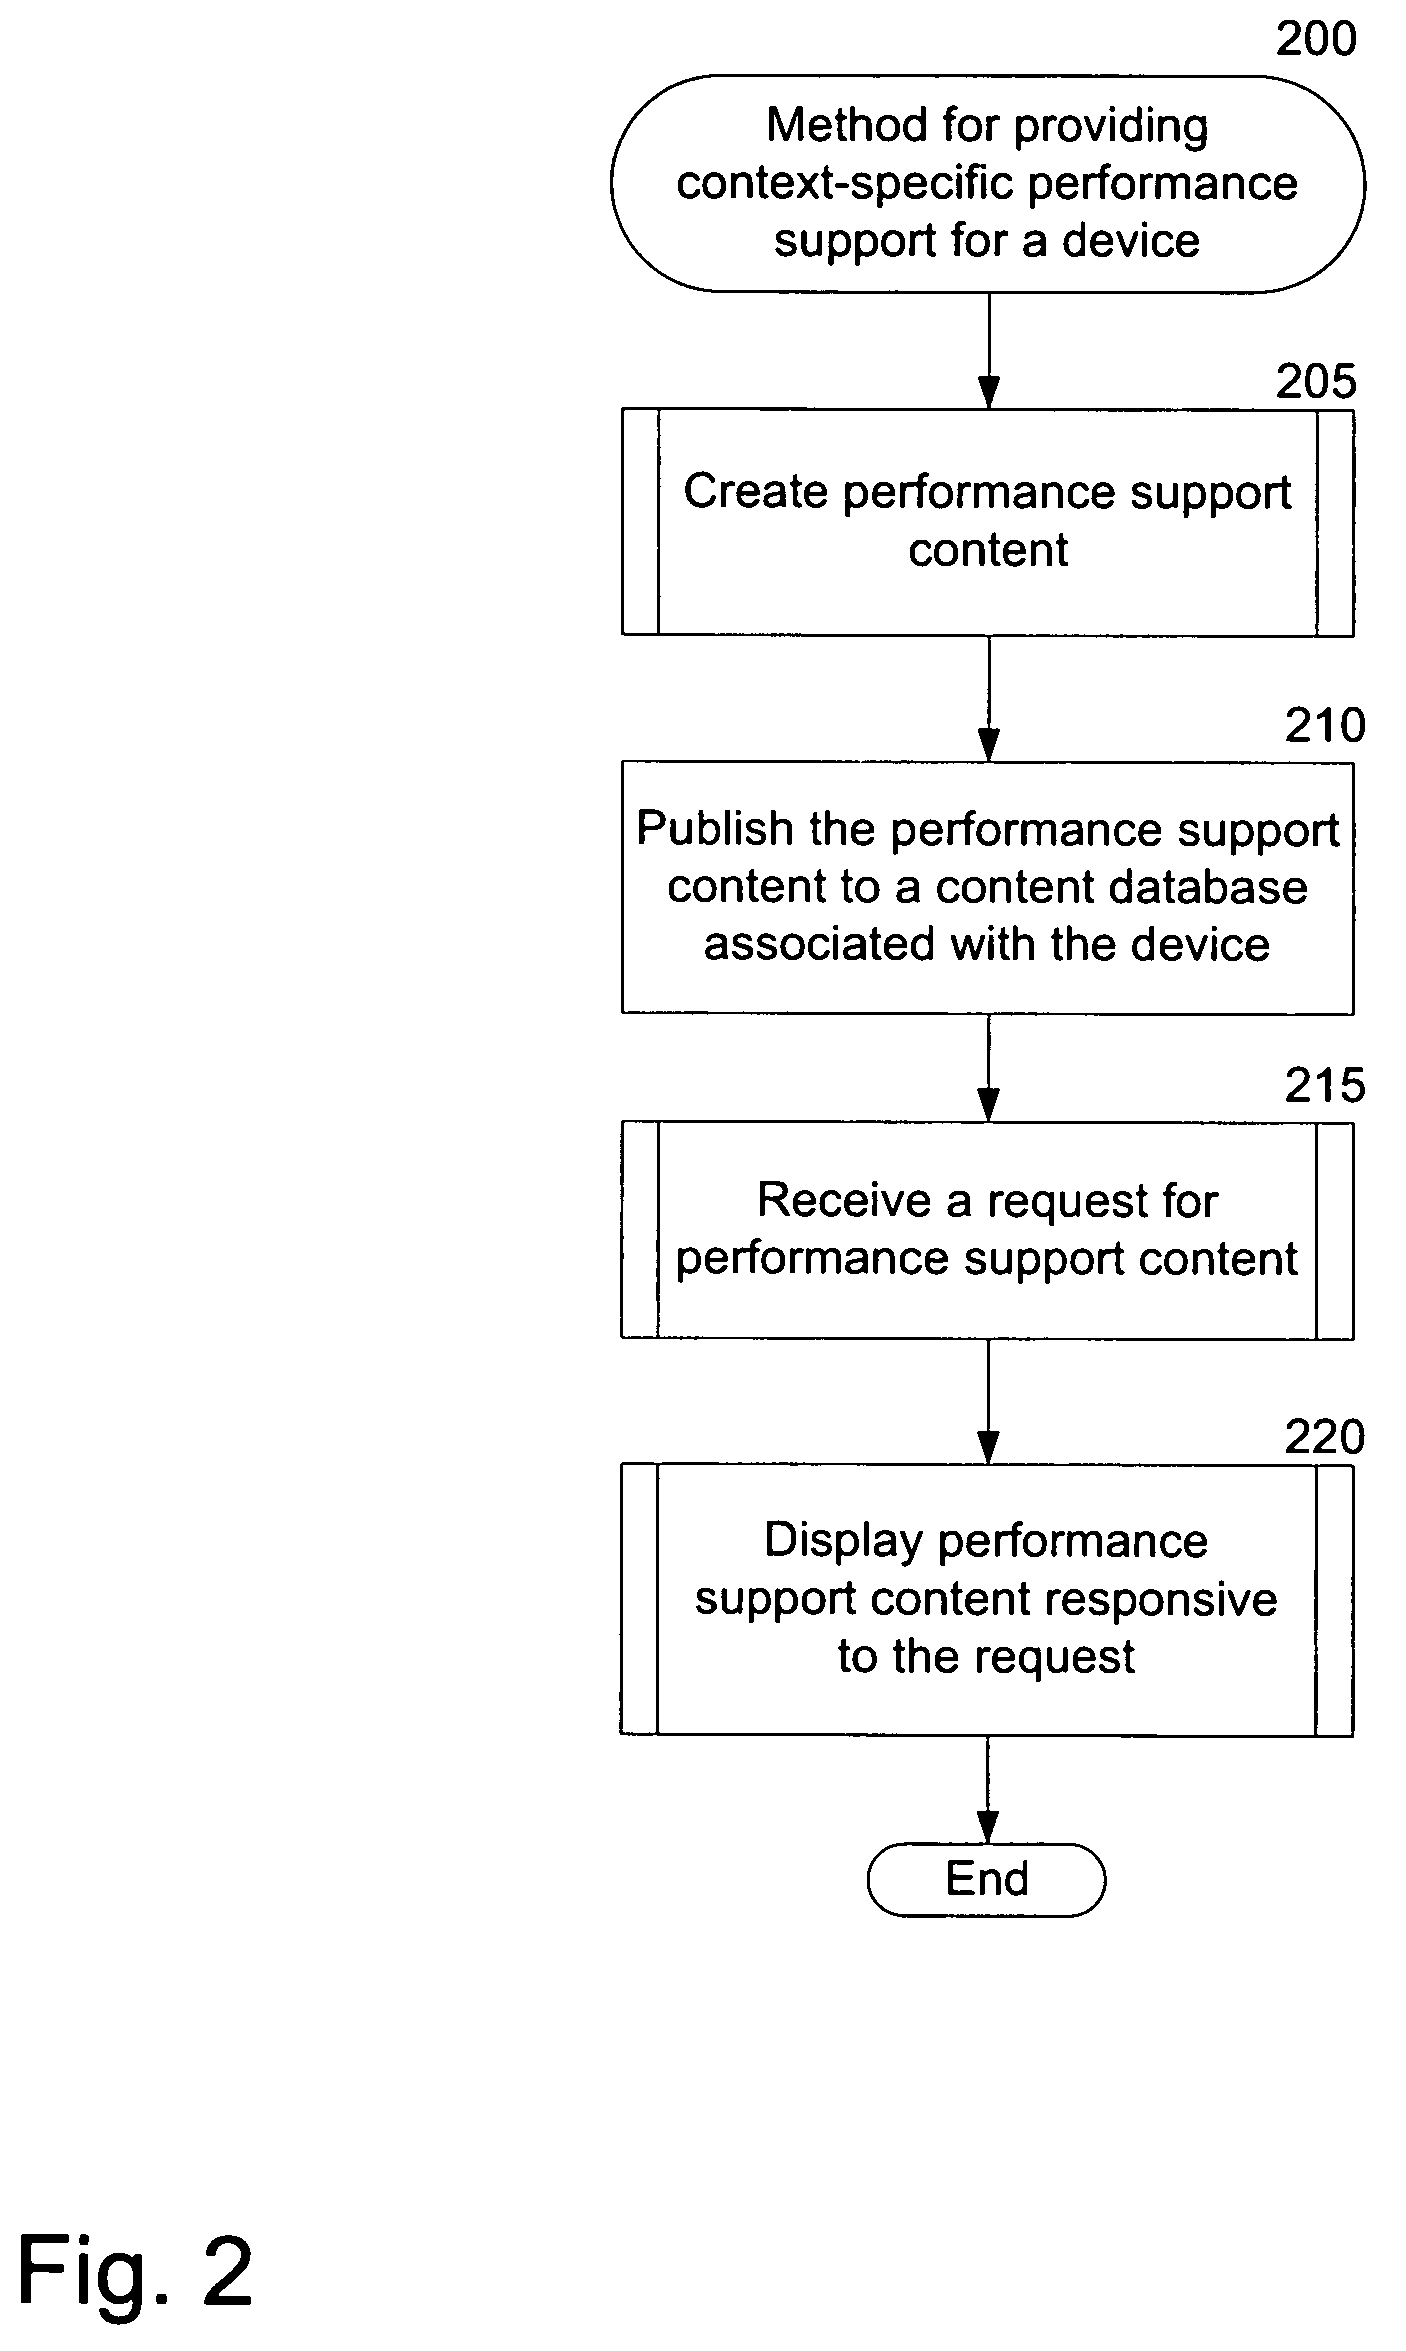 Context-specific electronic performance support